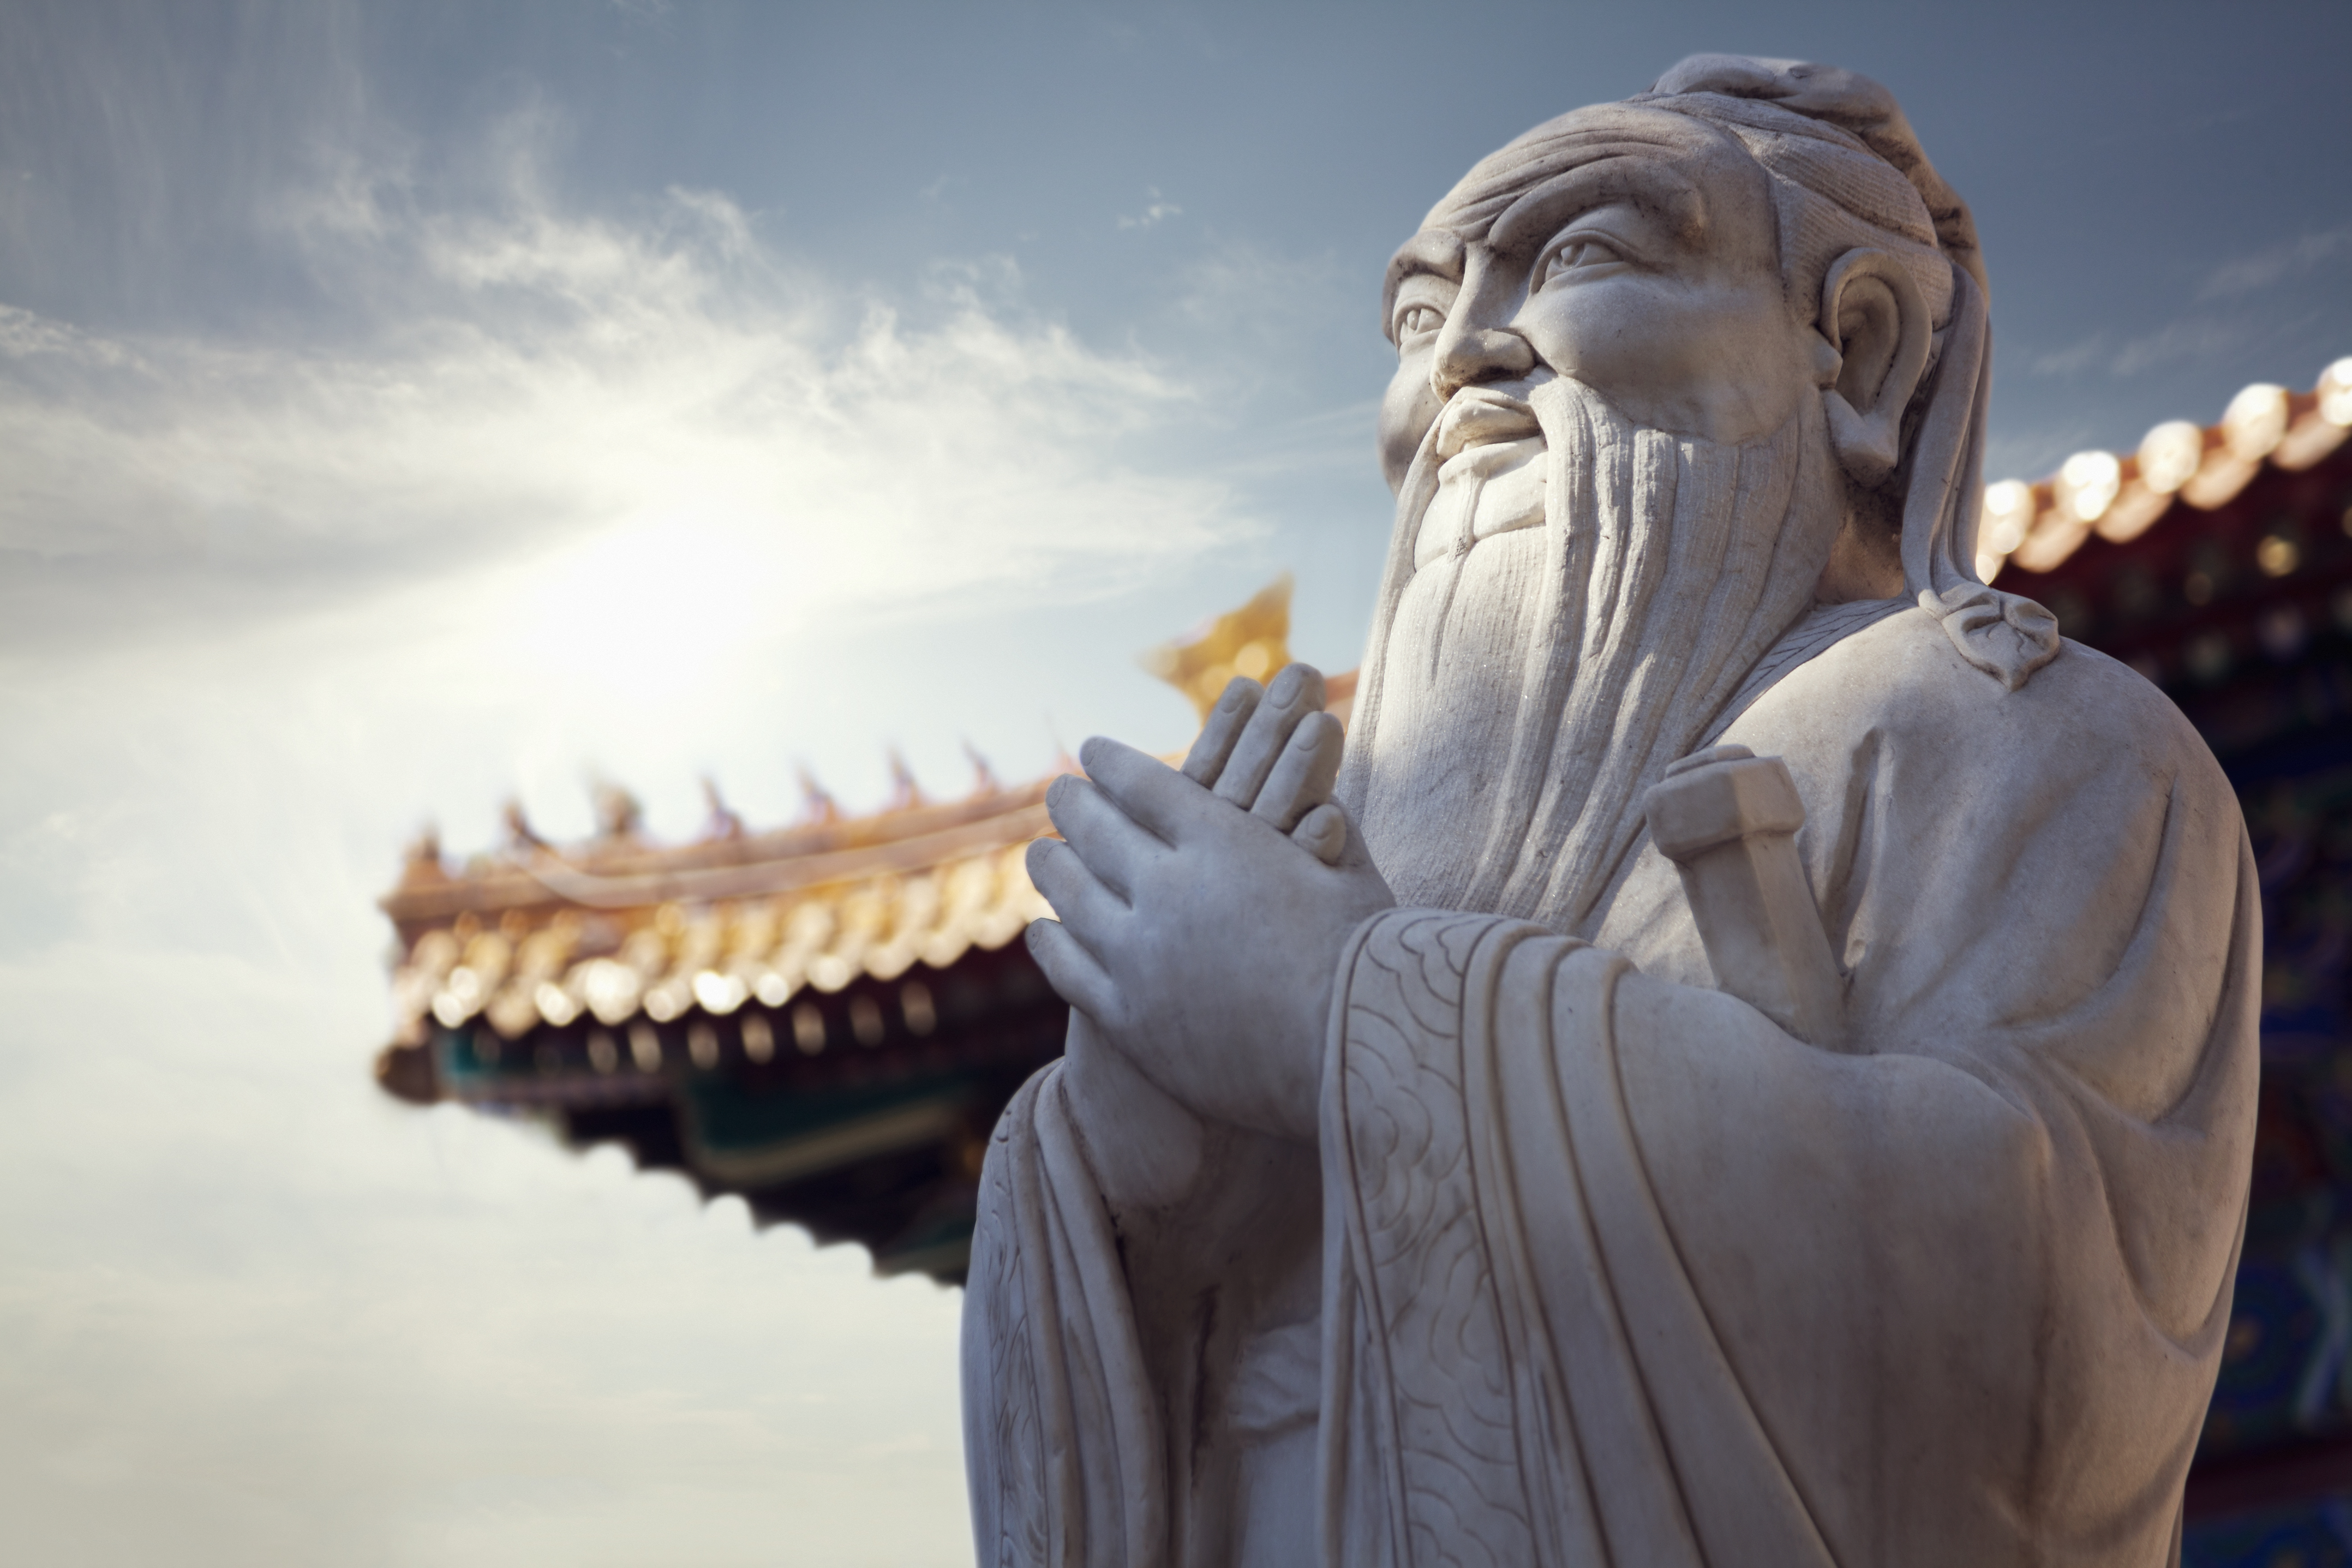 Sculpture of the Chinese philosopher Confucius. (Getty Images)